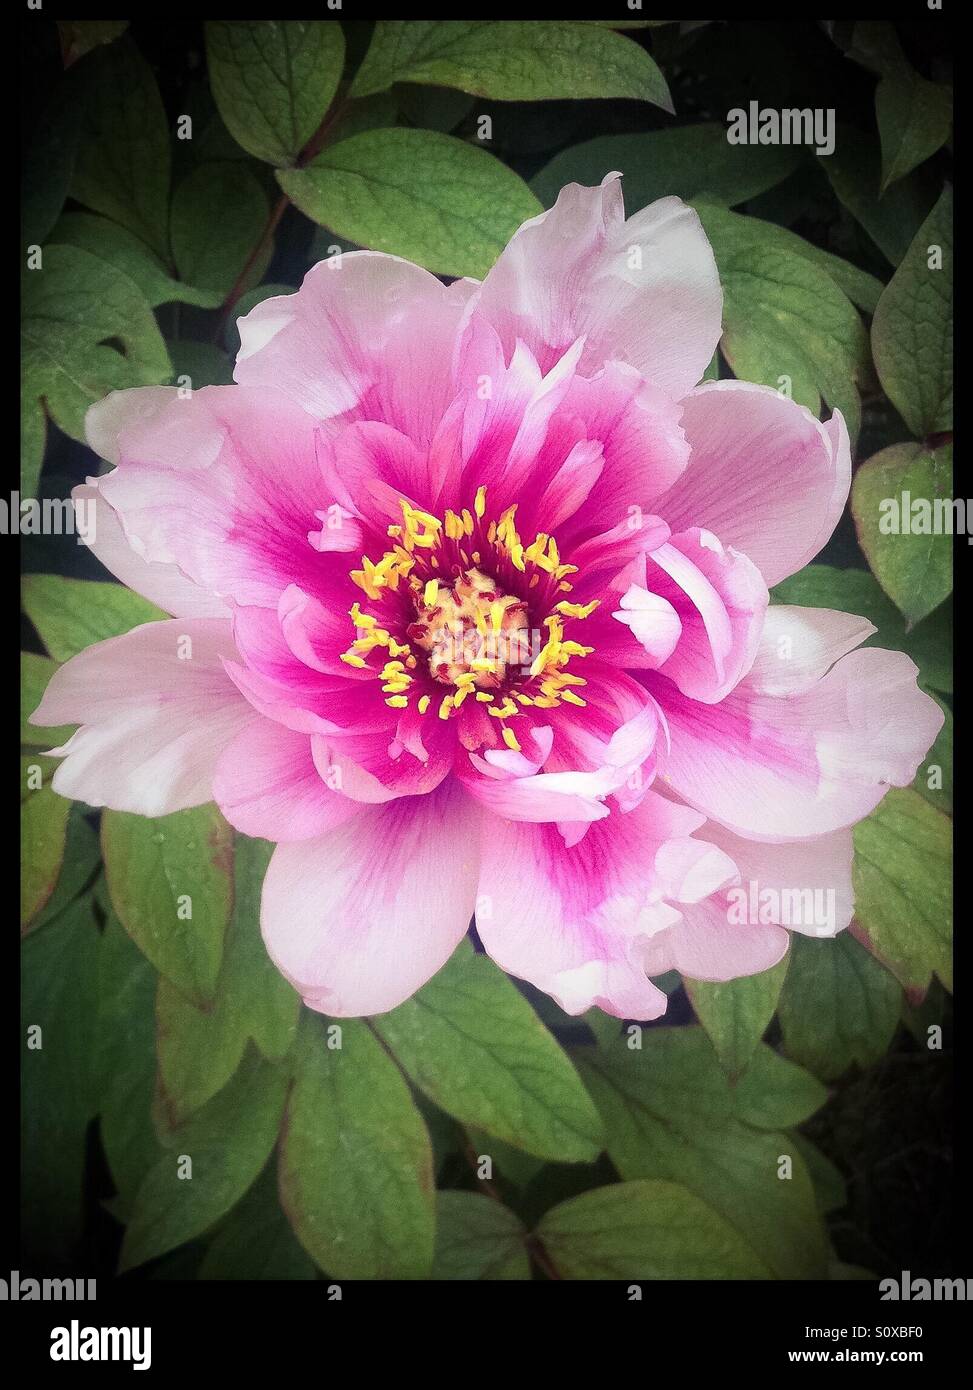 Pink Peony against green leaves Stock Photo